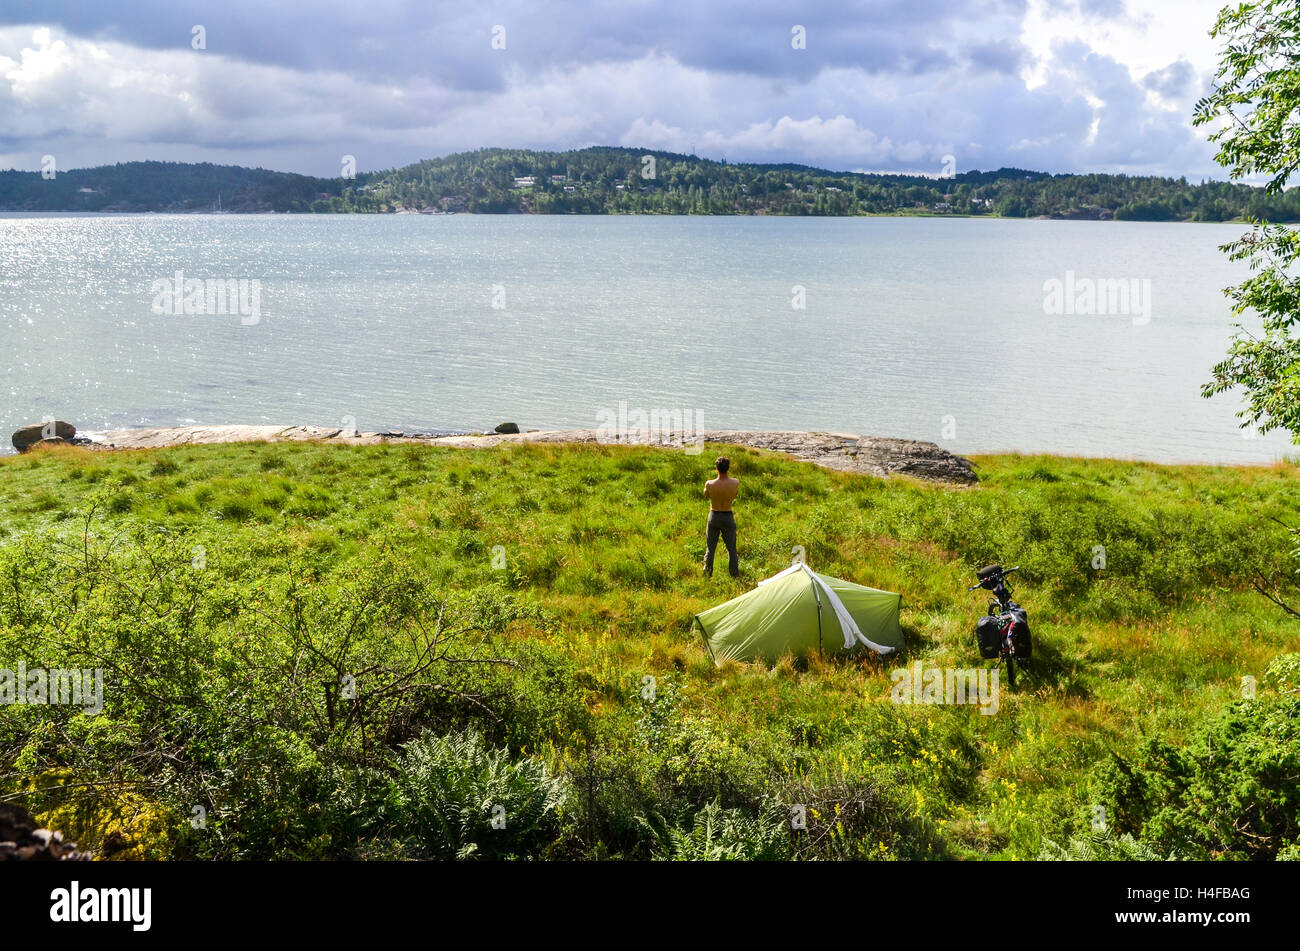 Man standing near tent after camping in Sweden (Orust) Stock Photo